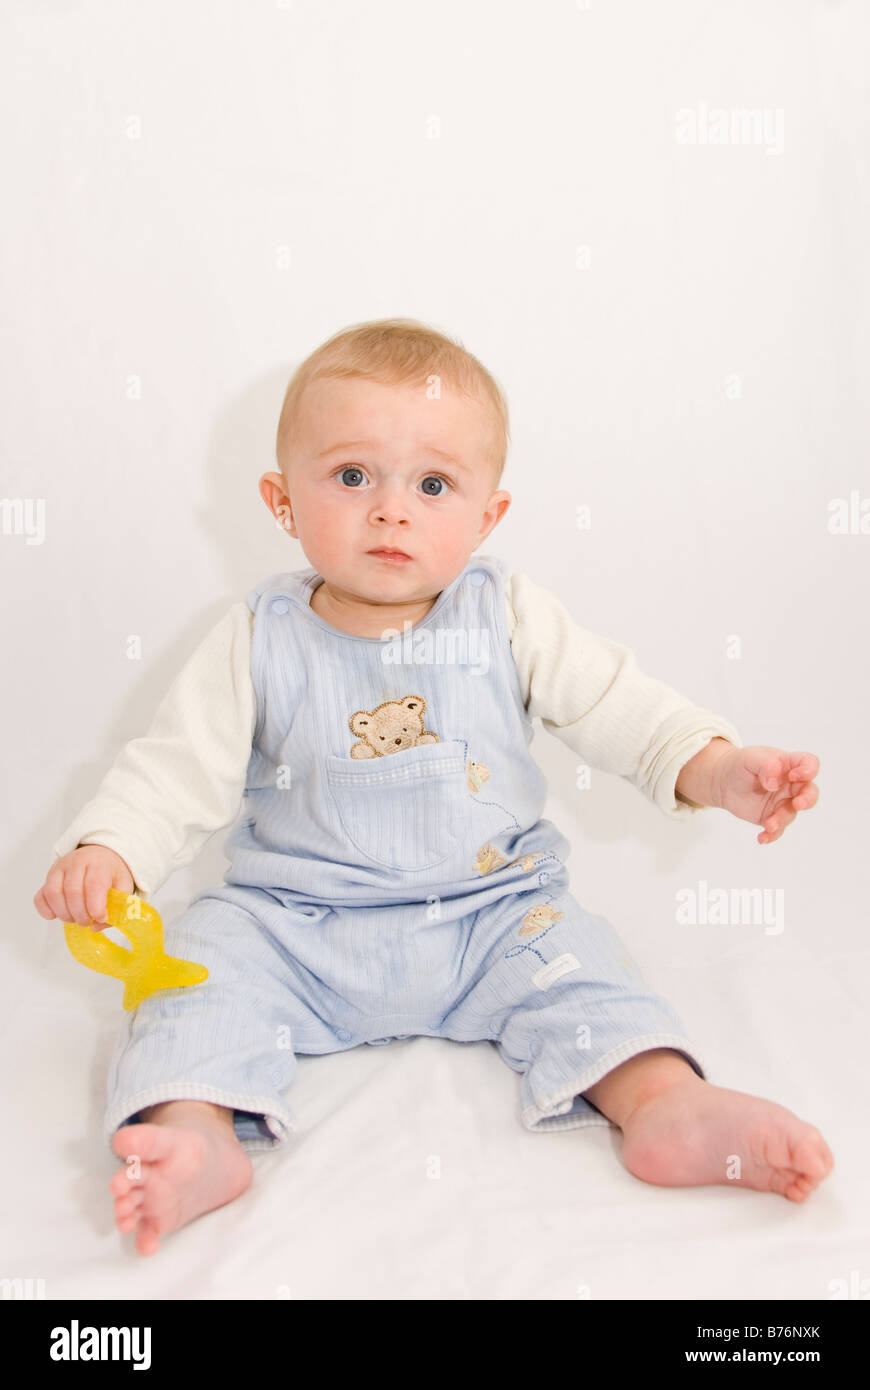 Full Length Portrait of Worried Frowning Baby Boy Sitting Up Holding Yellow Teething Toy Cut Out on White Stock Photo